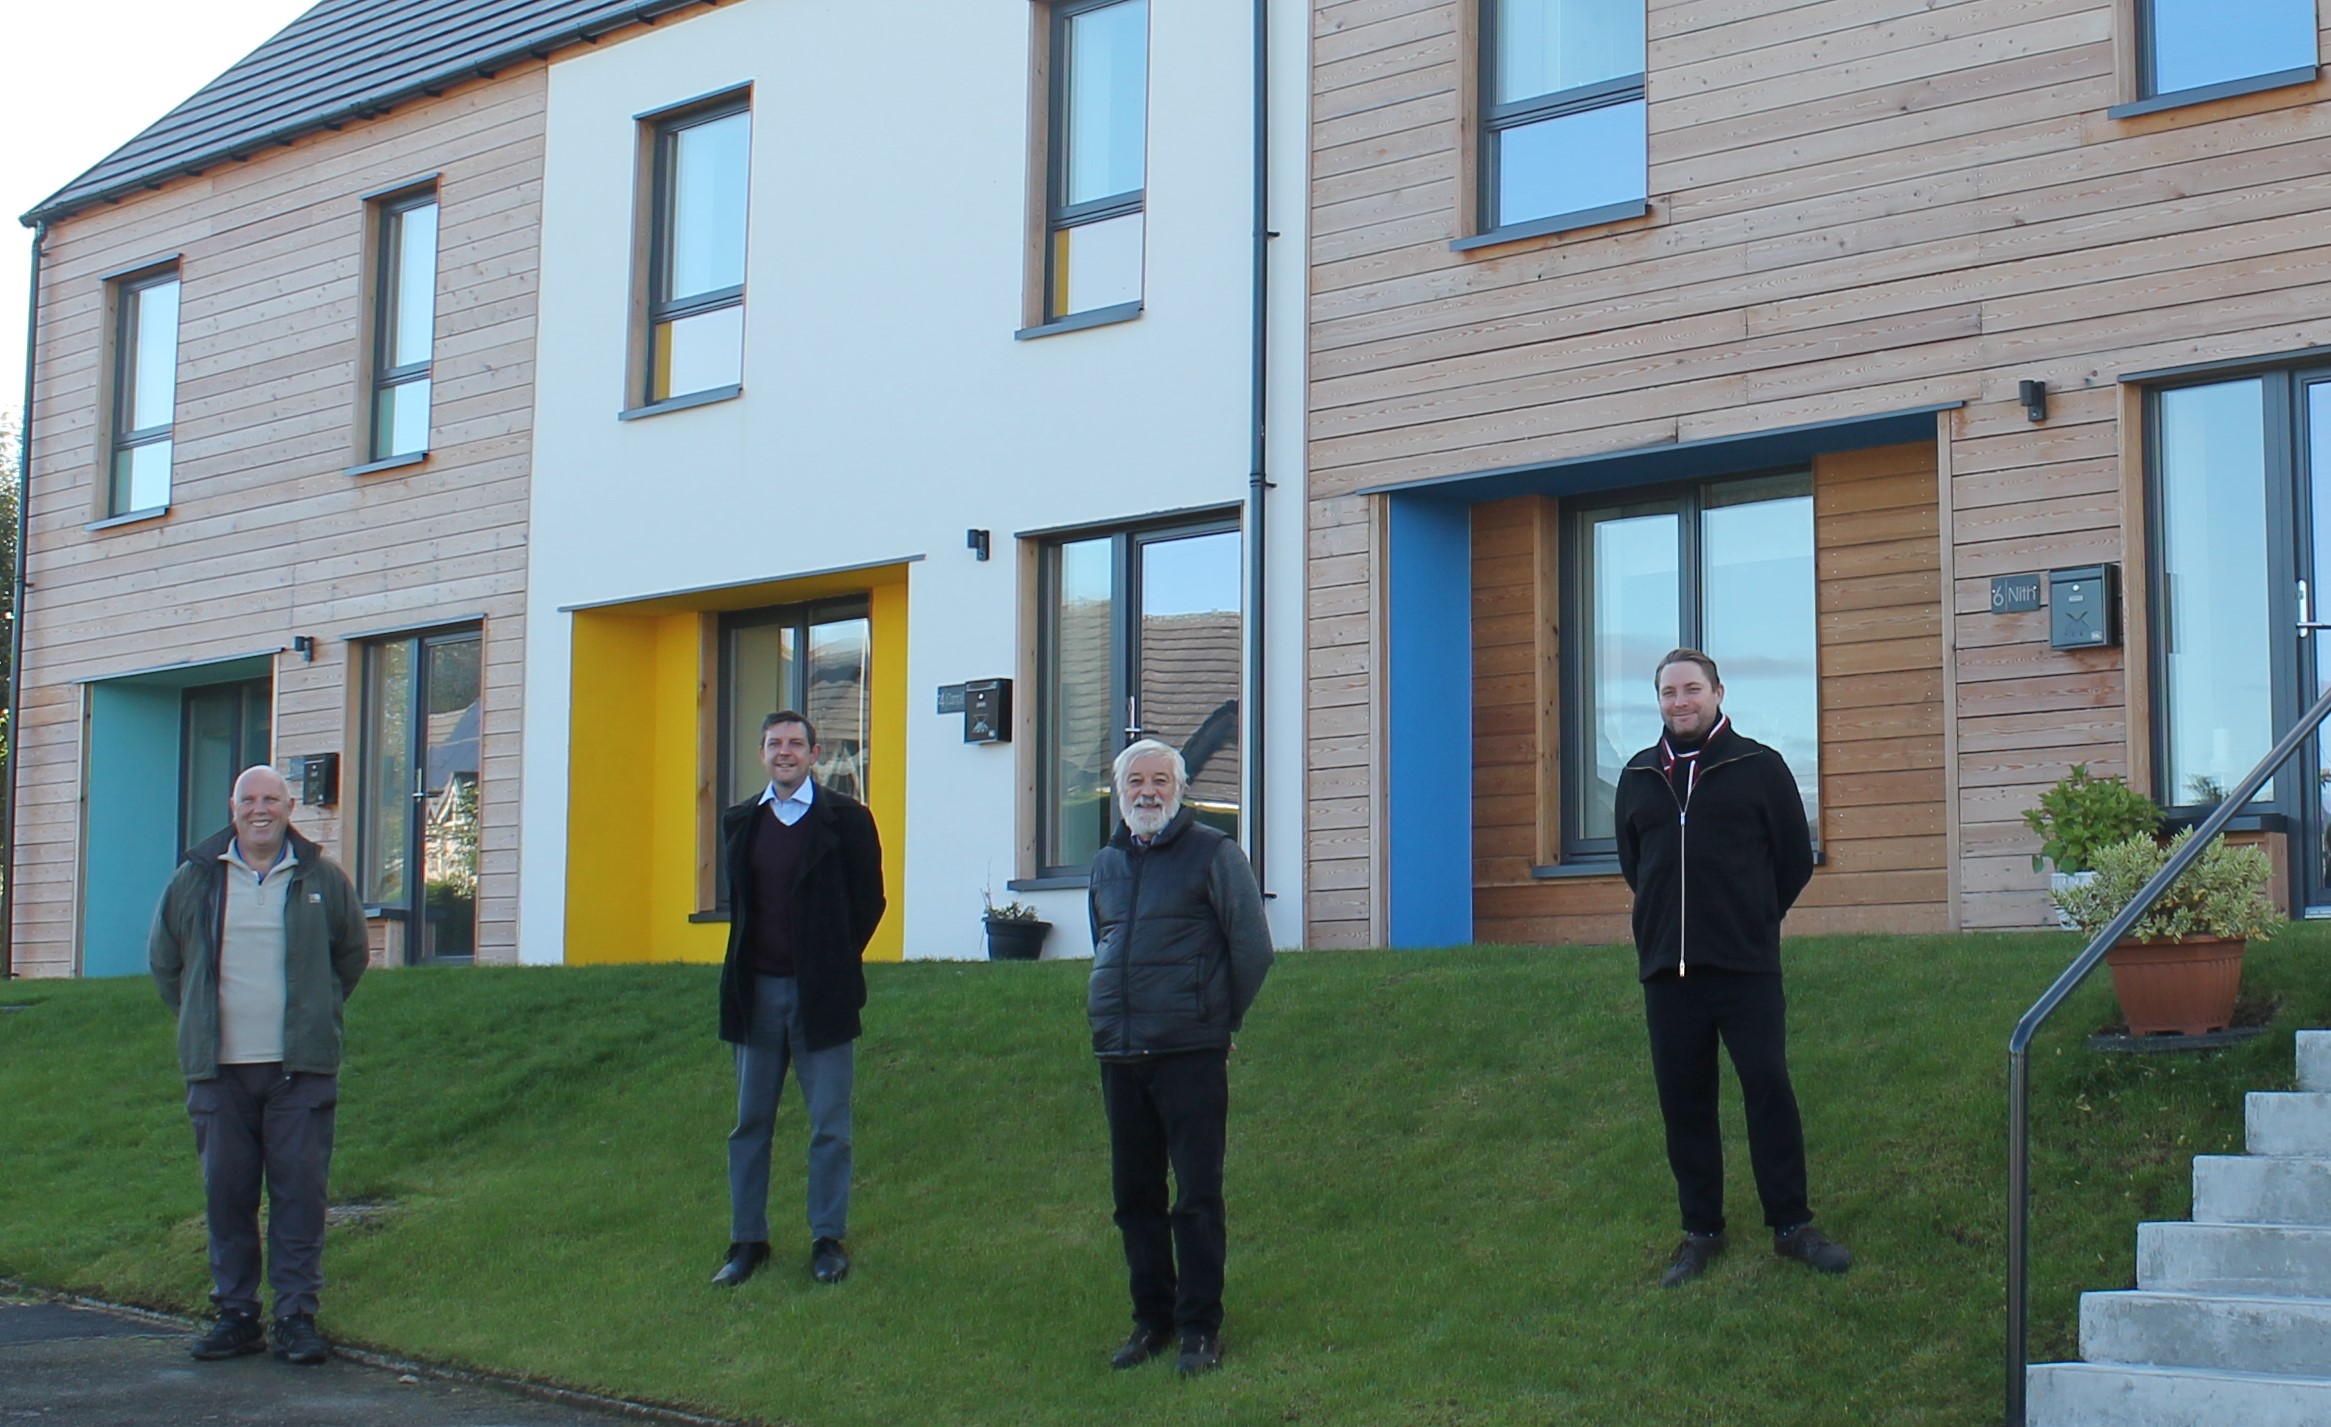 Tenants move into Scotland's first community-owned Passivhaus homes